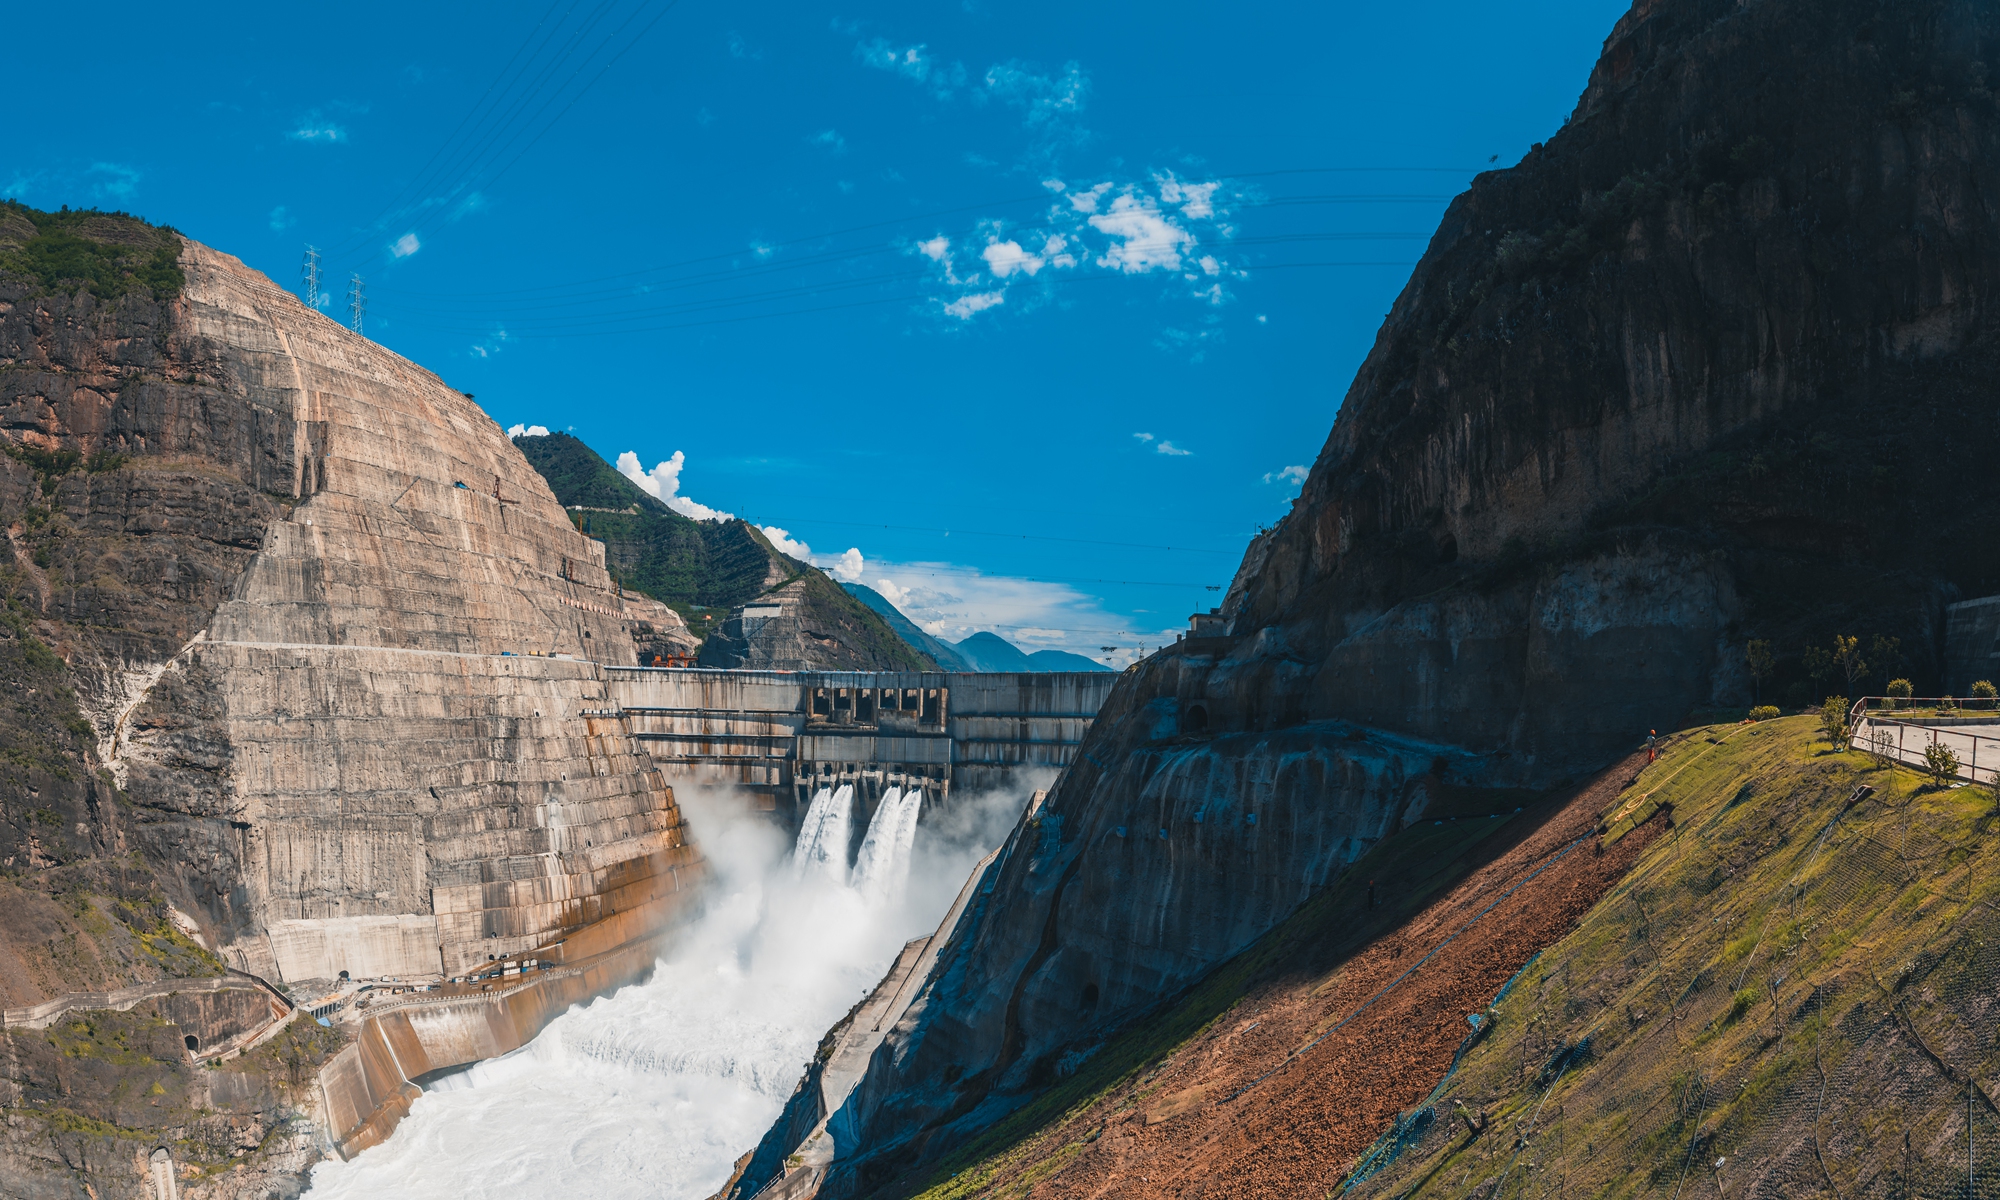 Baihetan hydropower project straddling the provinces of Southwest China's Yunnan and Sichuan Photo: VCG